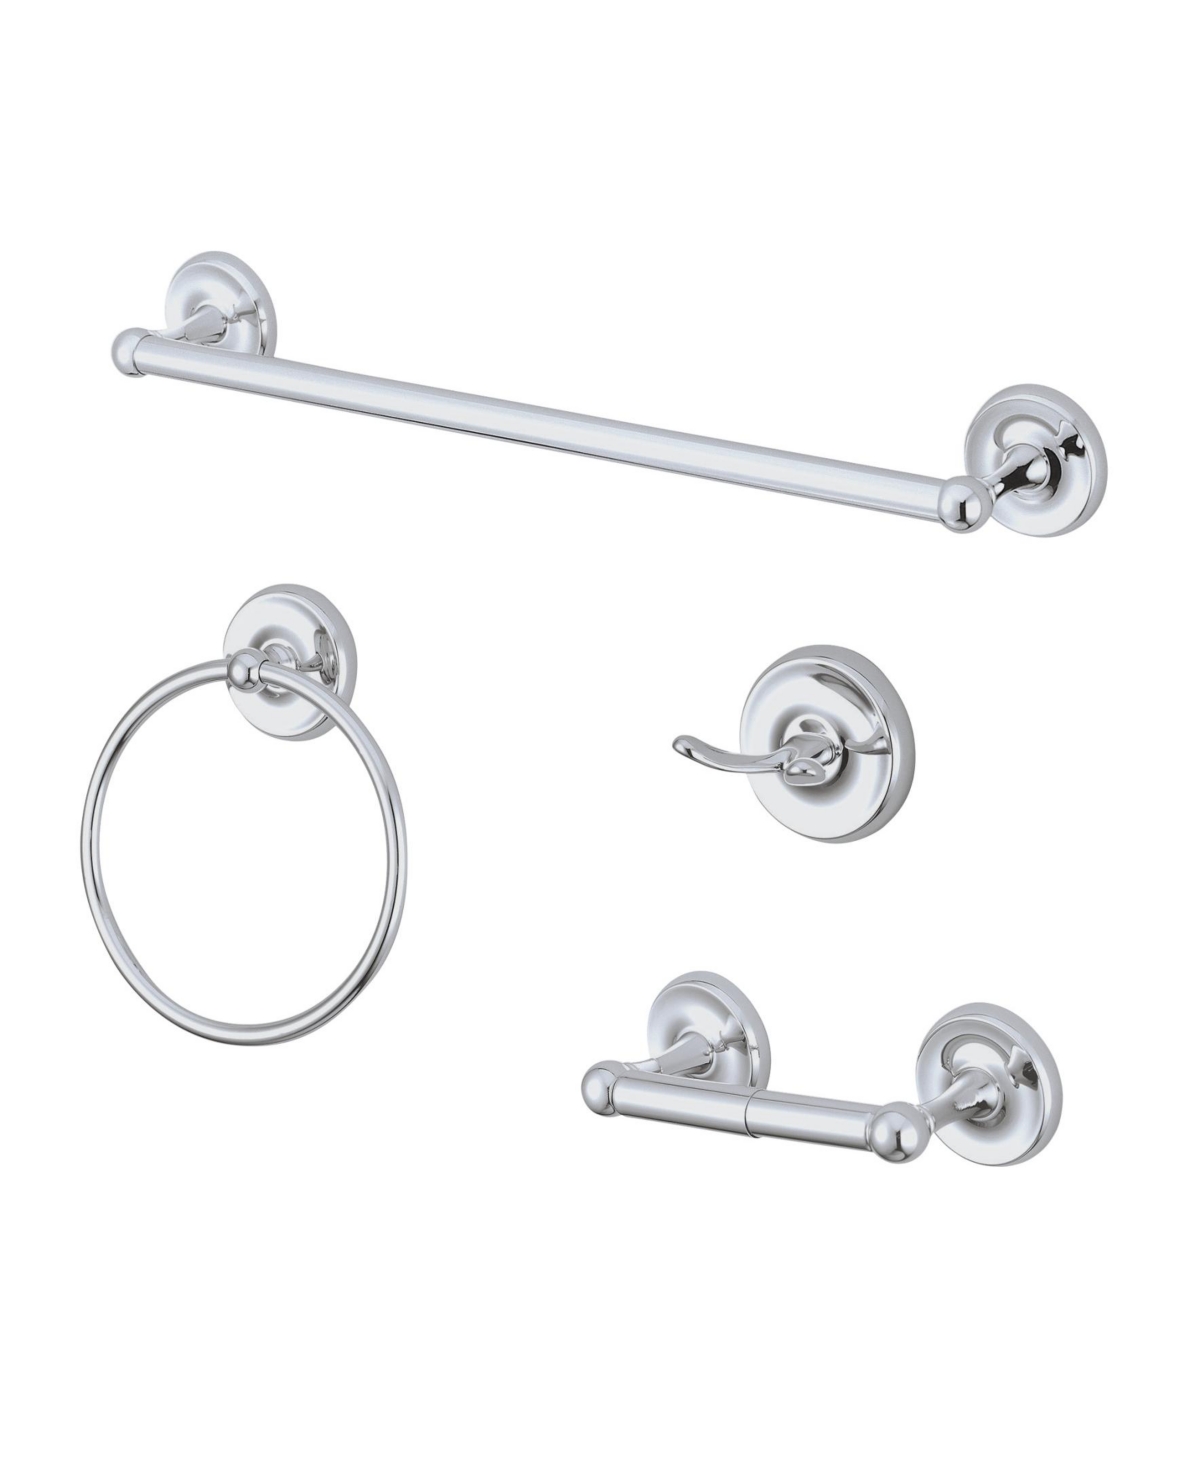 Kingston Brass 4-Pc. Bathroom Accessory Set in Polished Chrome Bedding